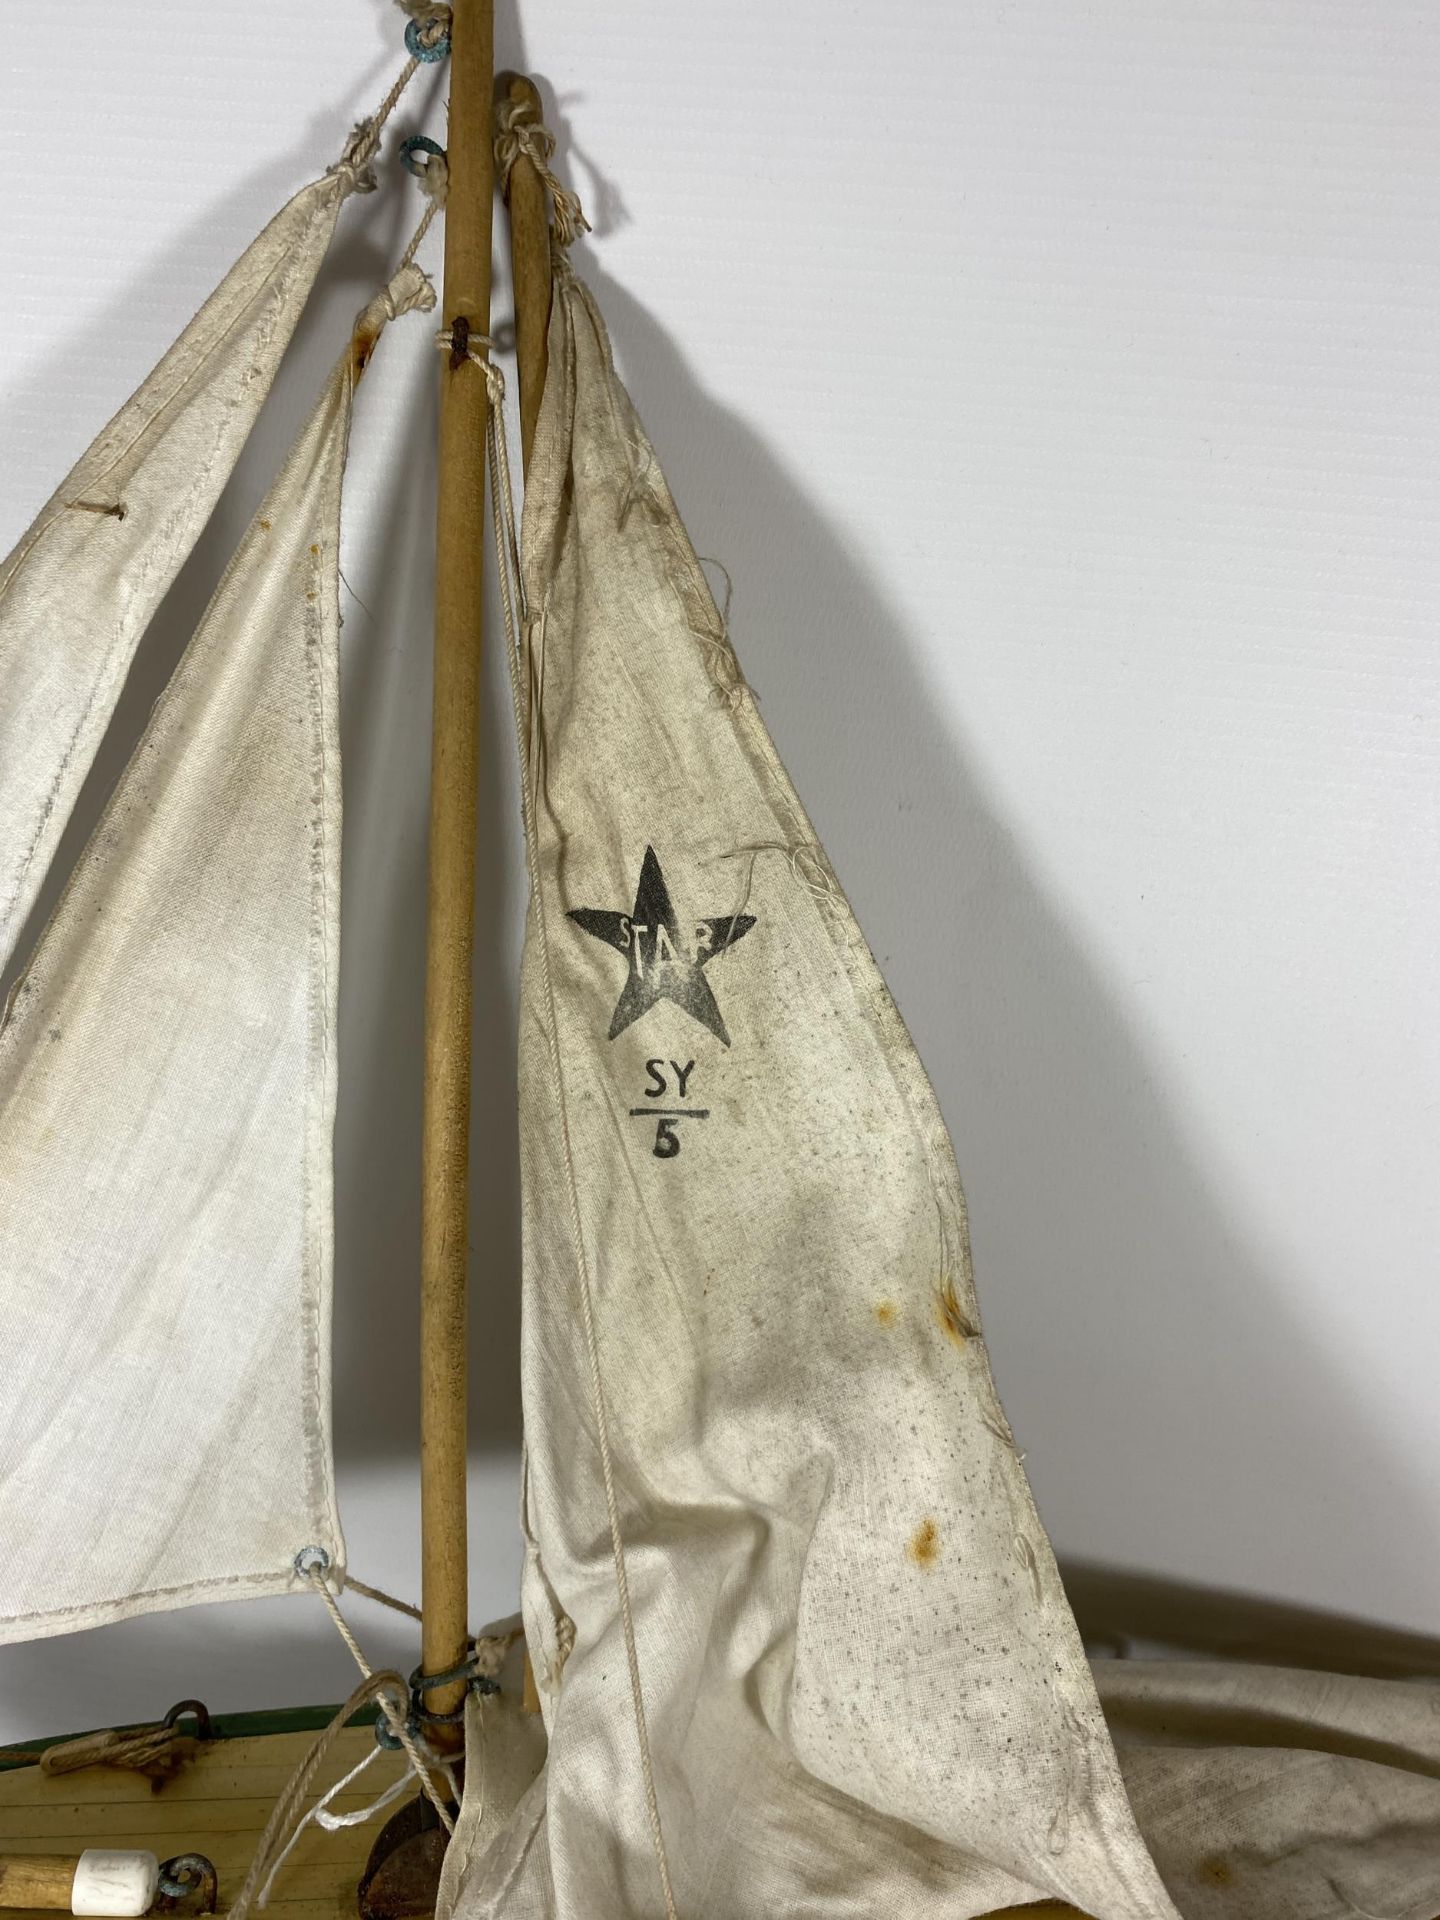 A VINTAGE 'STAR YACHT' SAILING BOAT MODEL - Image 3 of 5